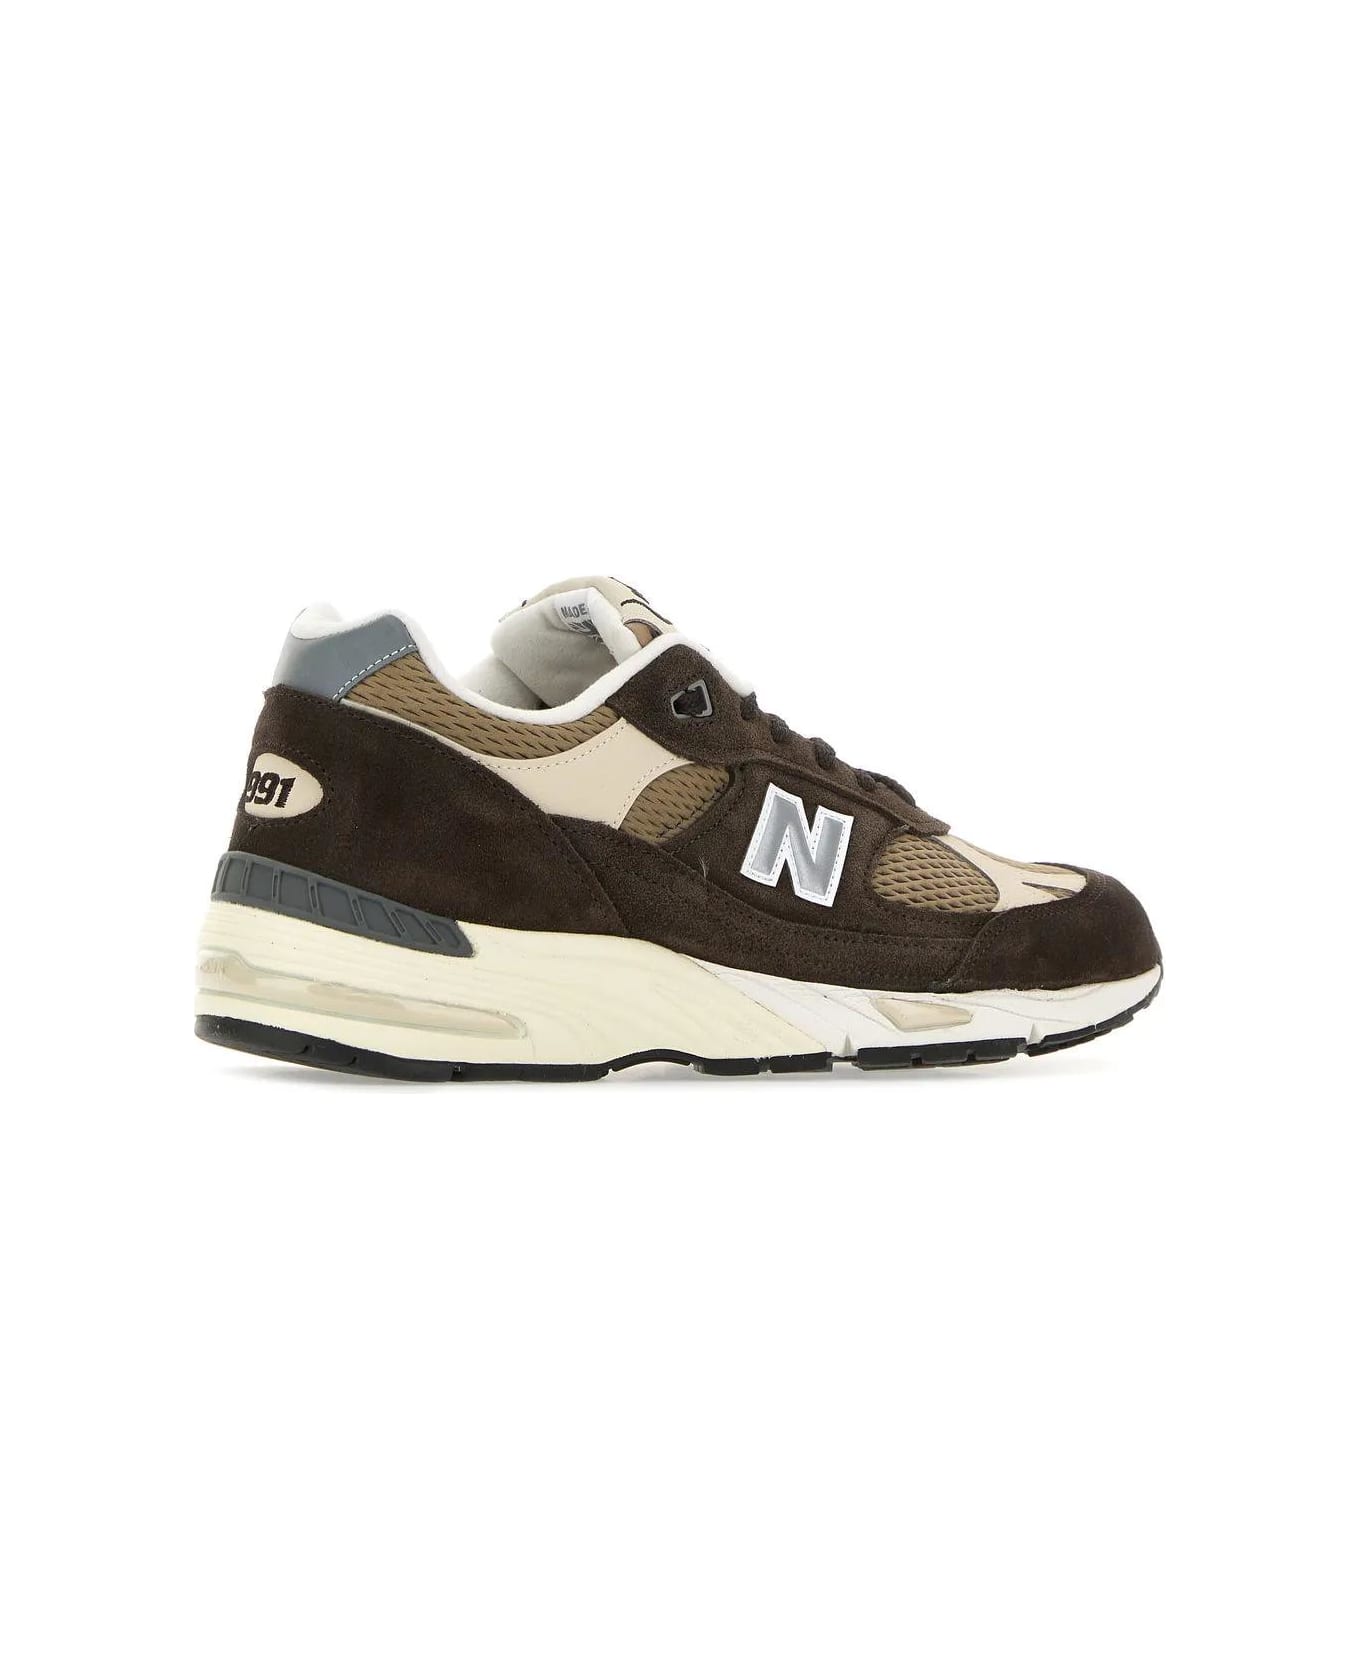 New Balance Brown Suede And Mesh 991v1 Sneakers - BROWN/NEUTRALS